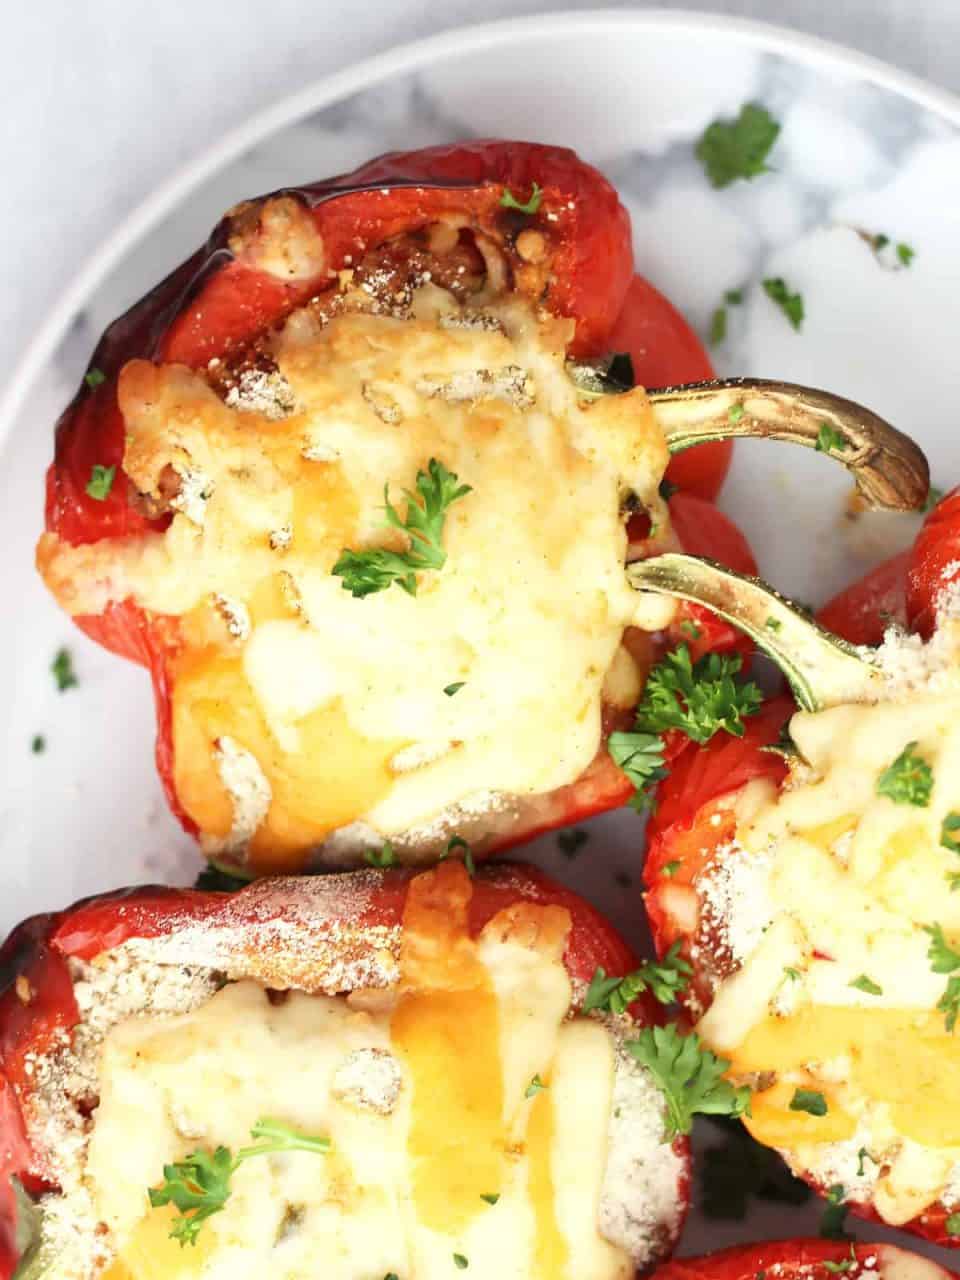 Three stuffed pepper halves topped with melted cheese on a serving plate.